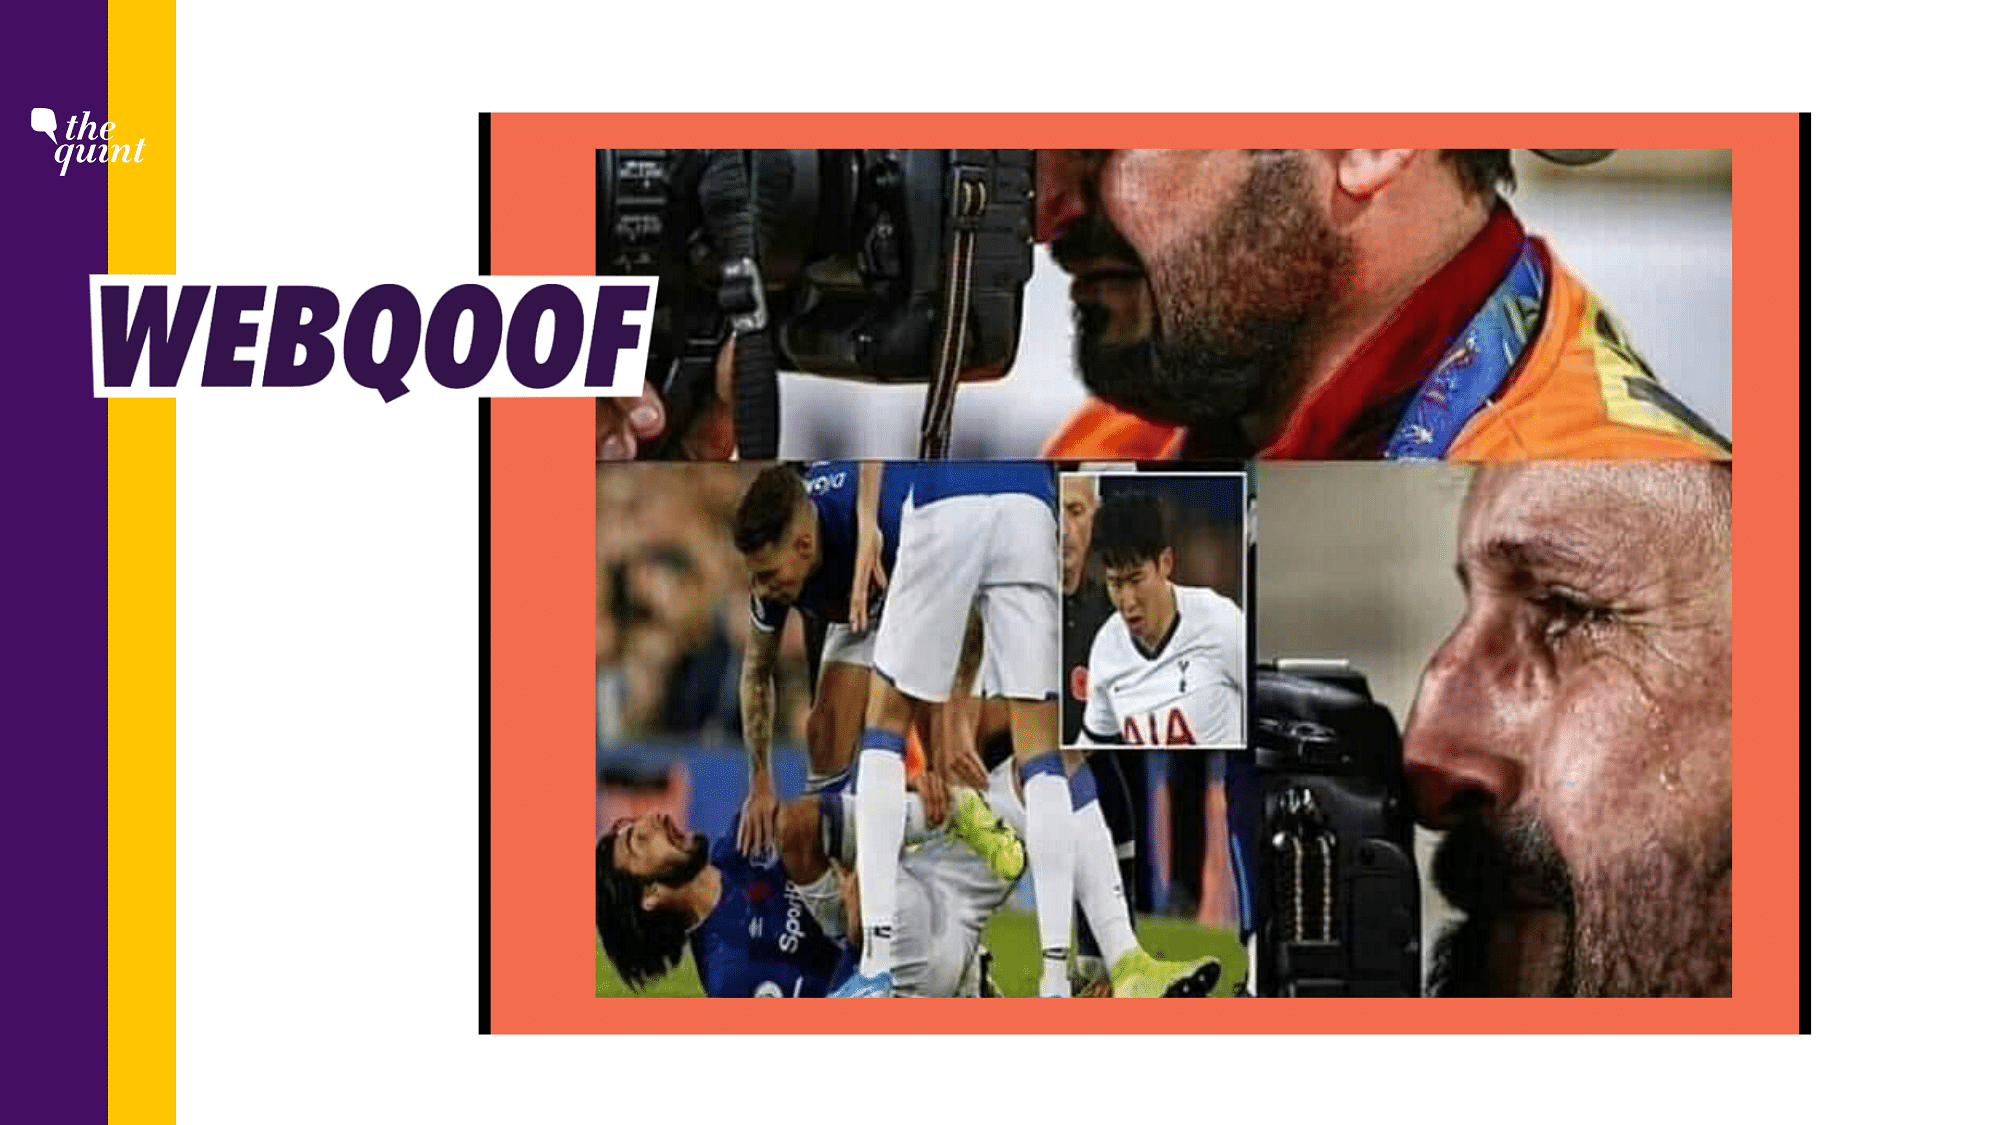 A photo is being shared with the claim that it shows a photographer crying as he looks at footballer Andre Gomes’ ankle getting broken.